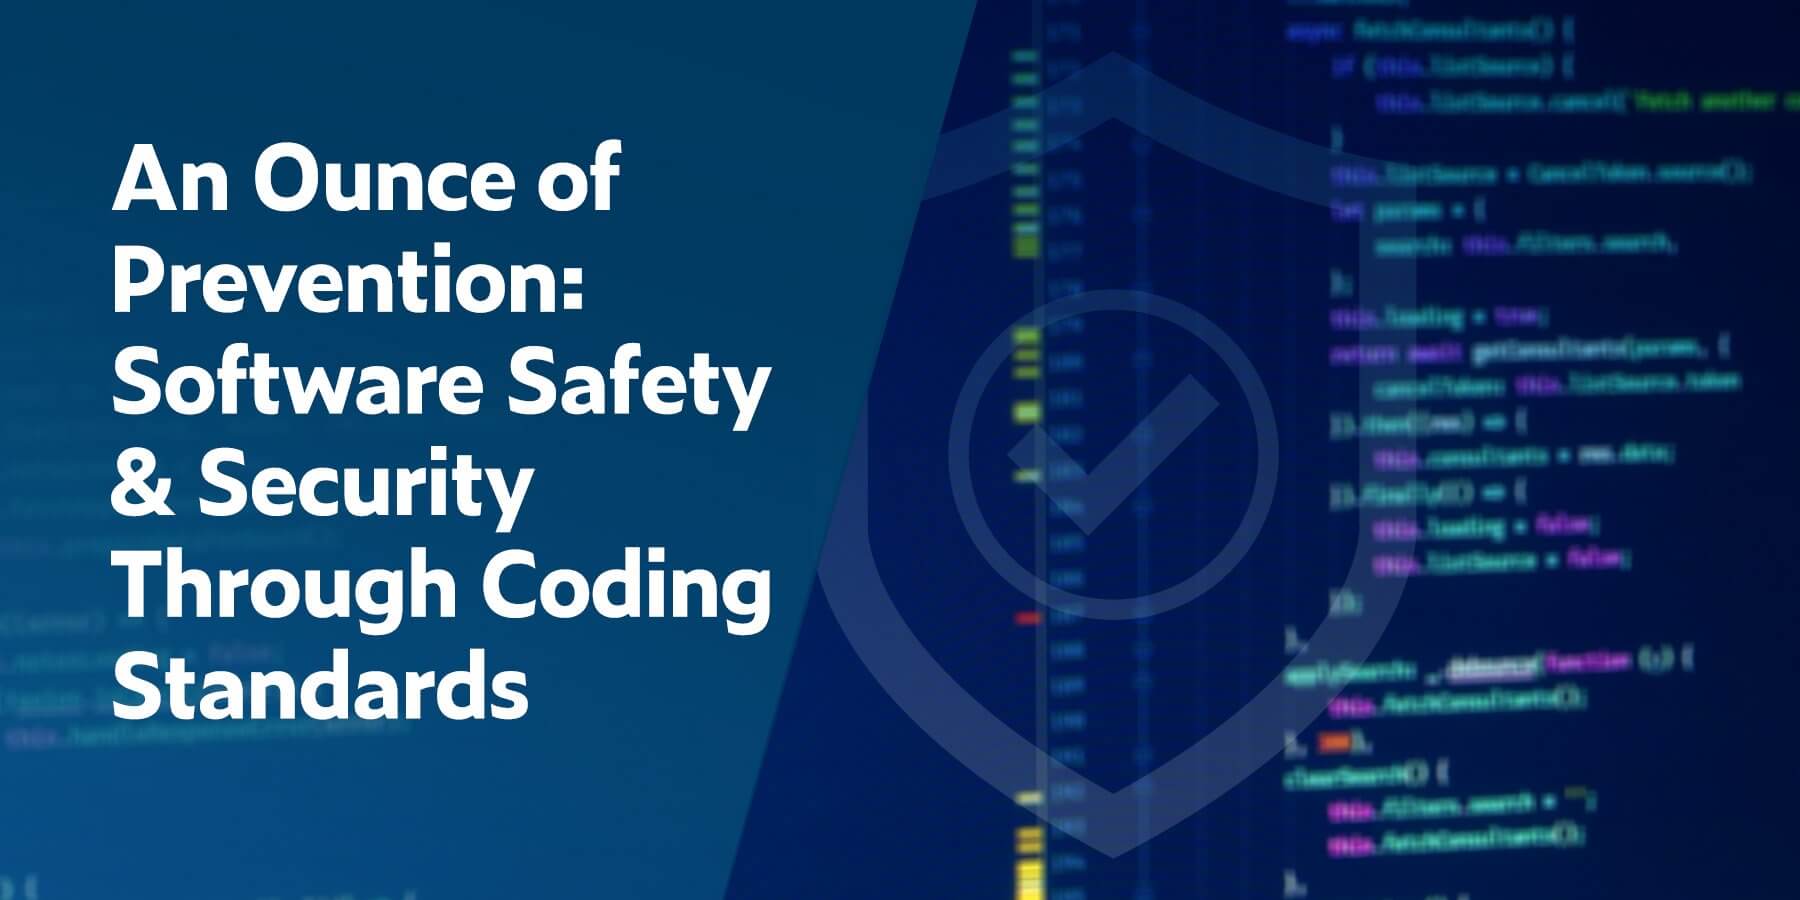 An Ounce of Prevention: Safety & Security Through Software Coding Standards